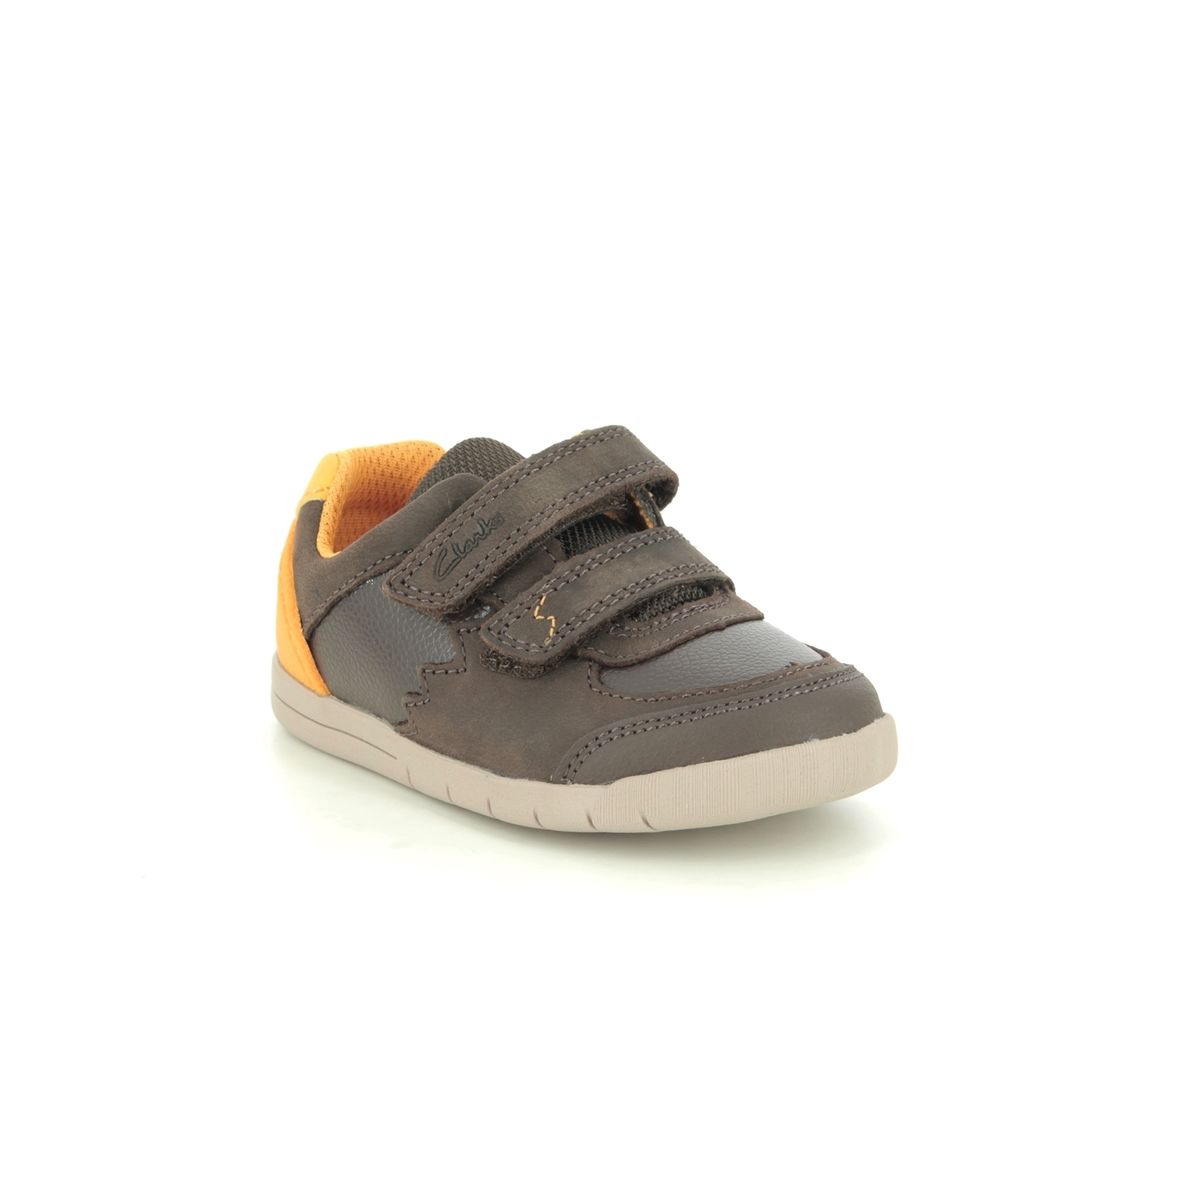 Clarks Rex Quest T Brown Leather Kids Boys Toddler Shoes 567756F In Size 6.5 In Plain Brown Leather F Width Fitting Regular Fit For kids